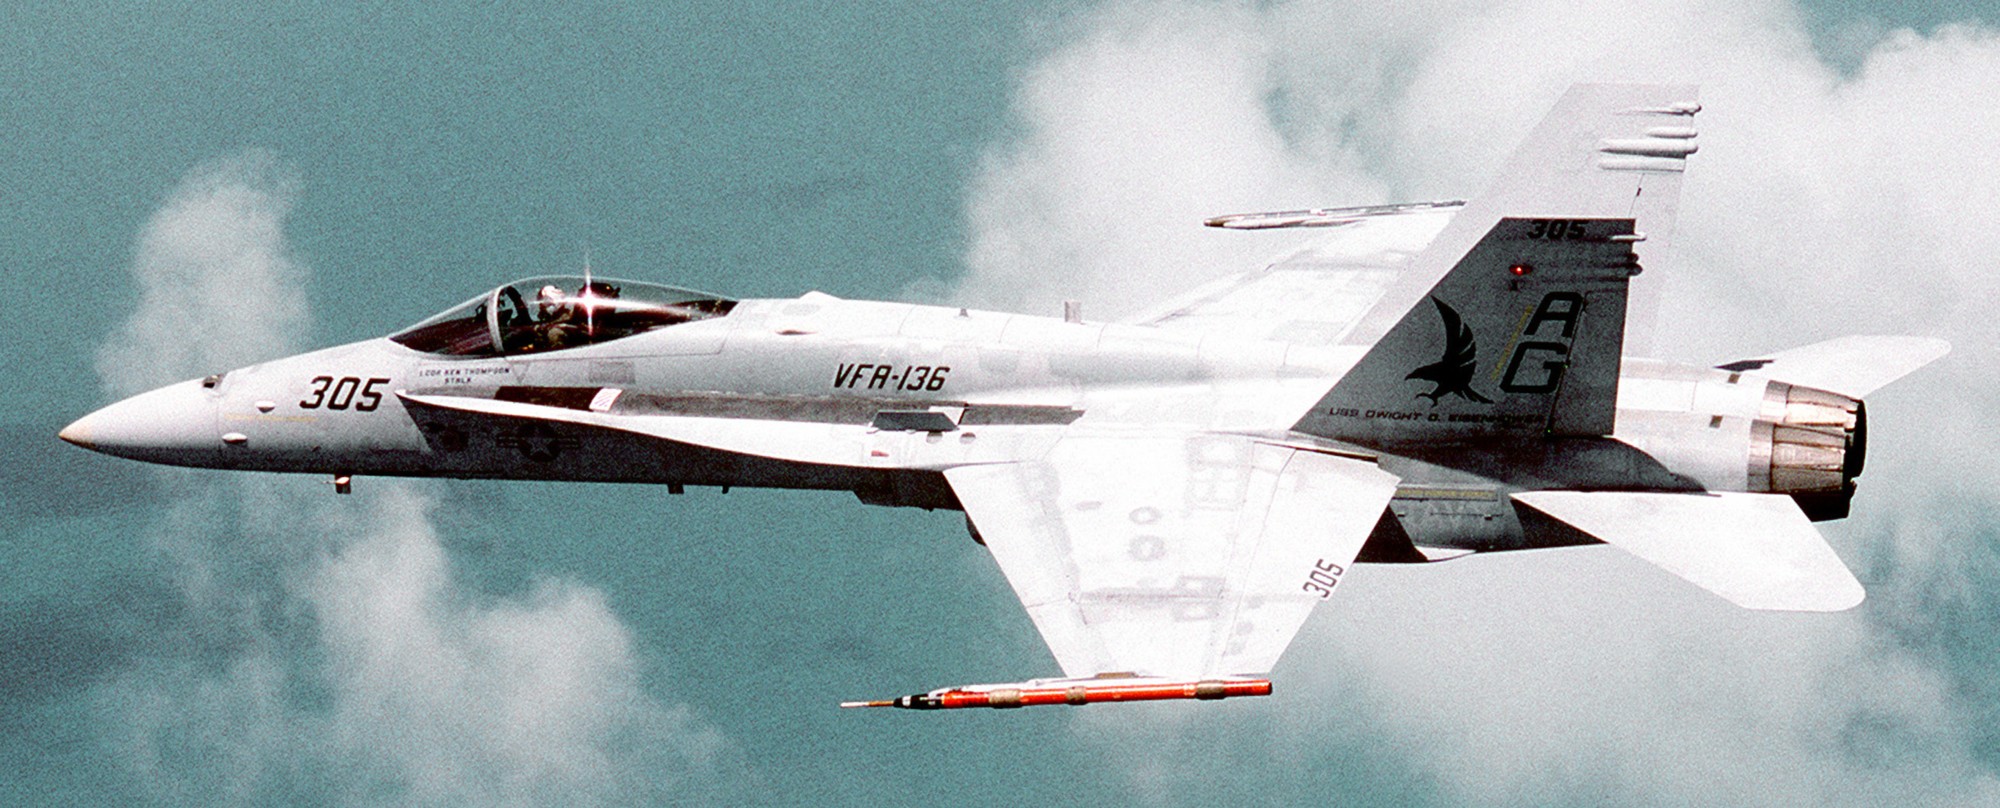 vfa-136 knighthawks strike fighter squadron f/a-18c hornet 1992 61 cvw-7 carrier air wing